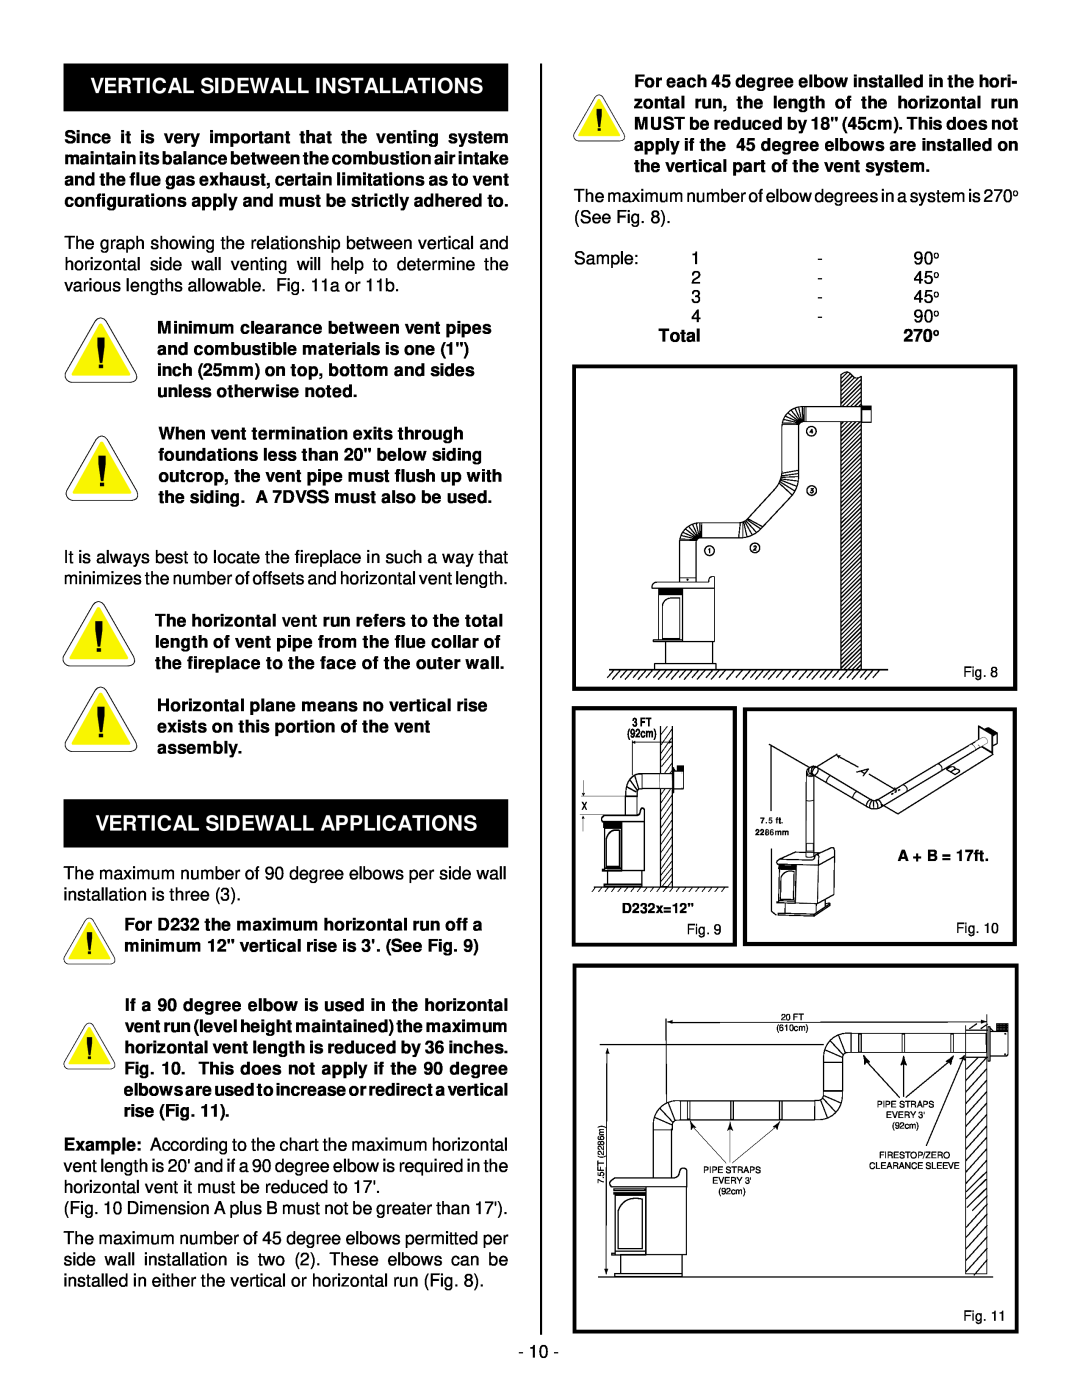 Vermont Casting D232 installation instructions Vertical Sidewall Installations, Vertical Sidewall Applications, Total, 270o 